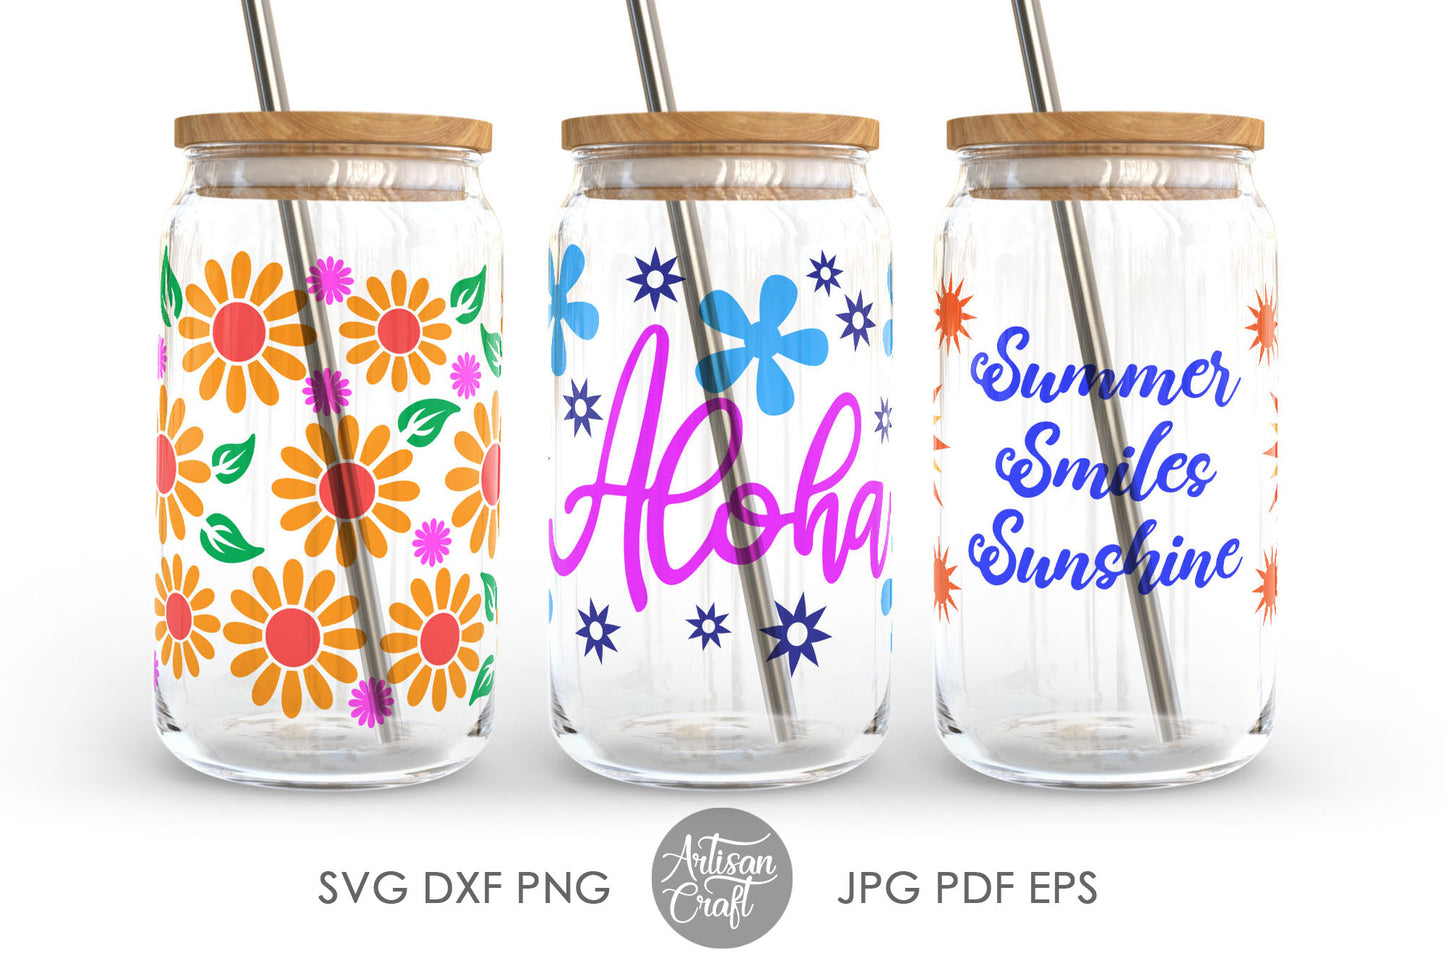 16oz Glass can SVG for summer